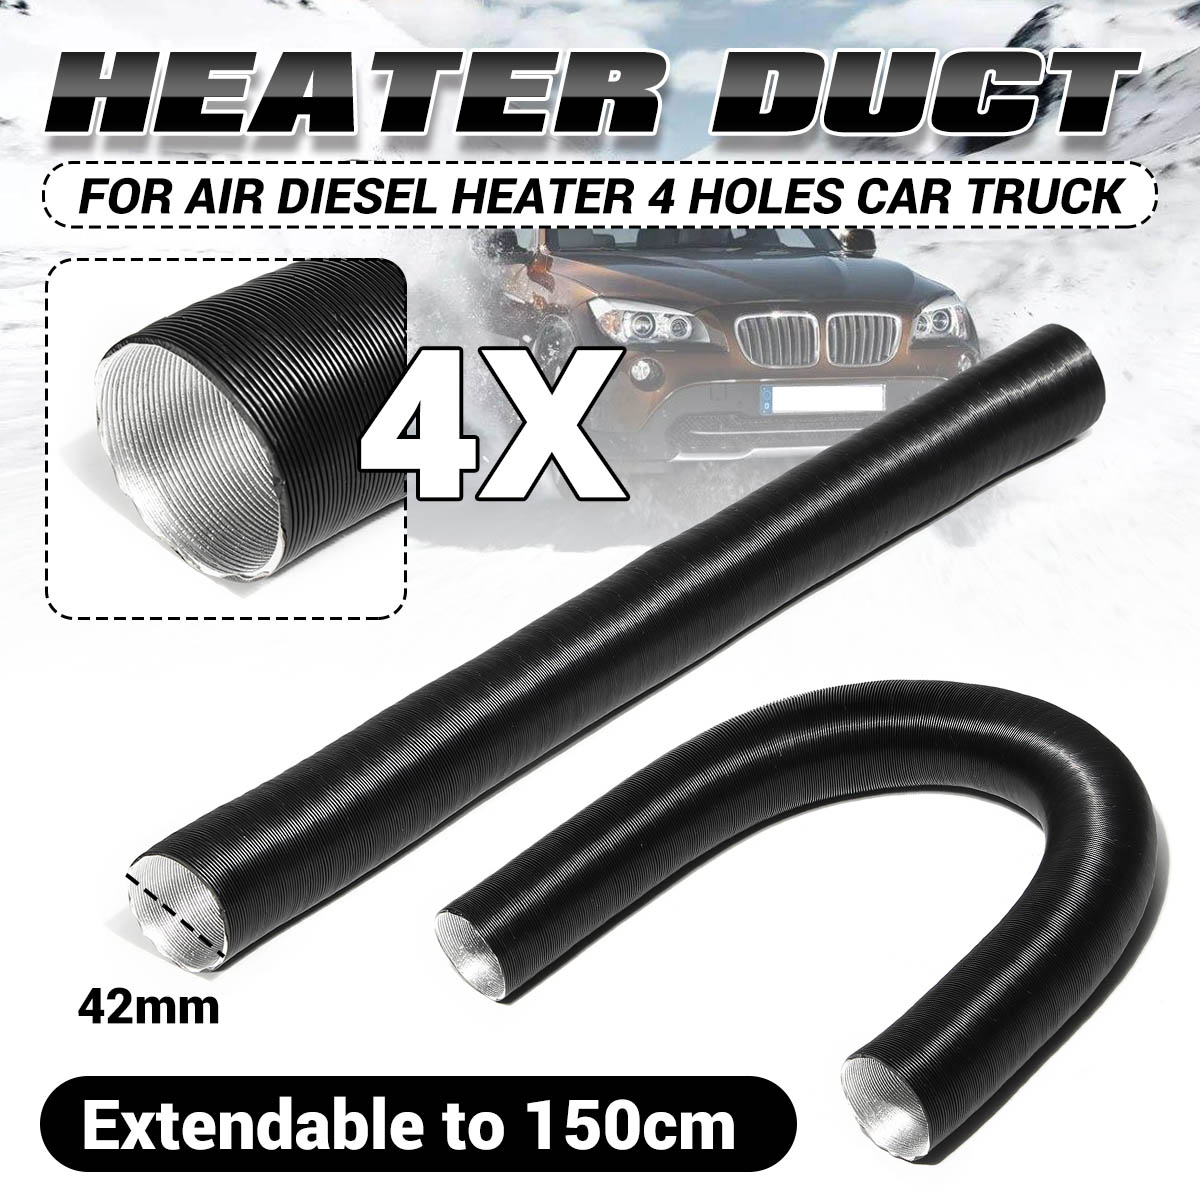 42mm-Outlet-Tube-Heater-Duct-Pipe-Air-Ducting-For-Air-Diesel-Heater-4-holes-Car-Truck-1632314-1